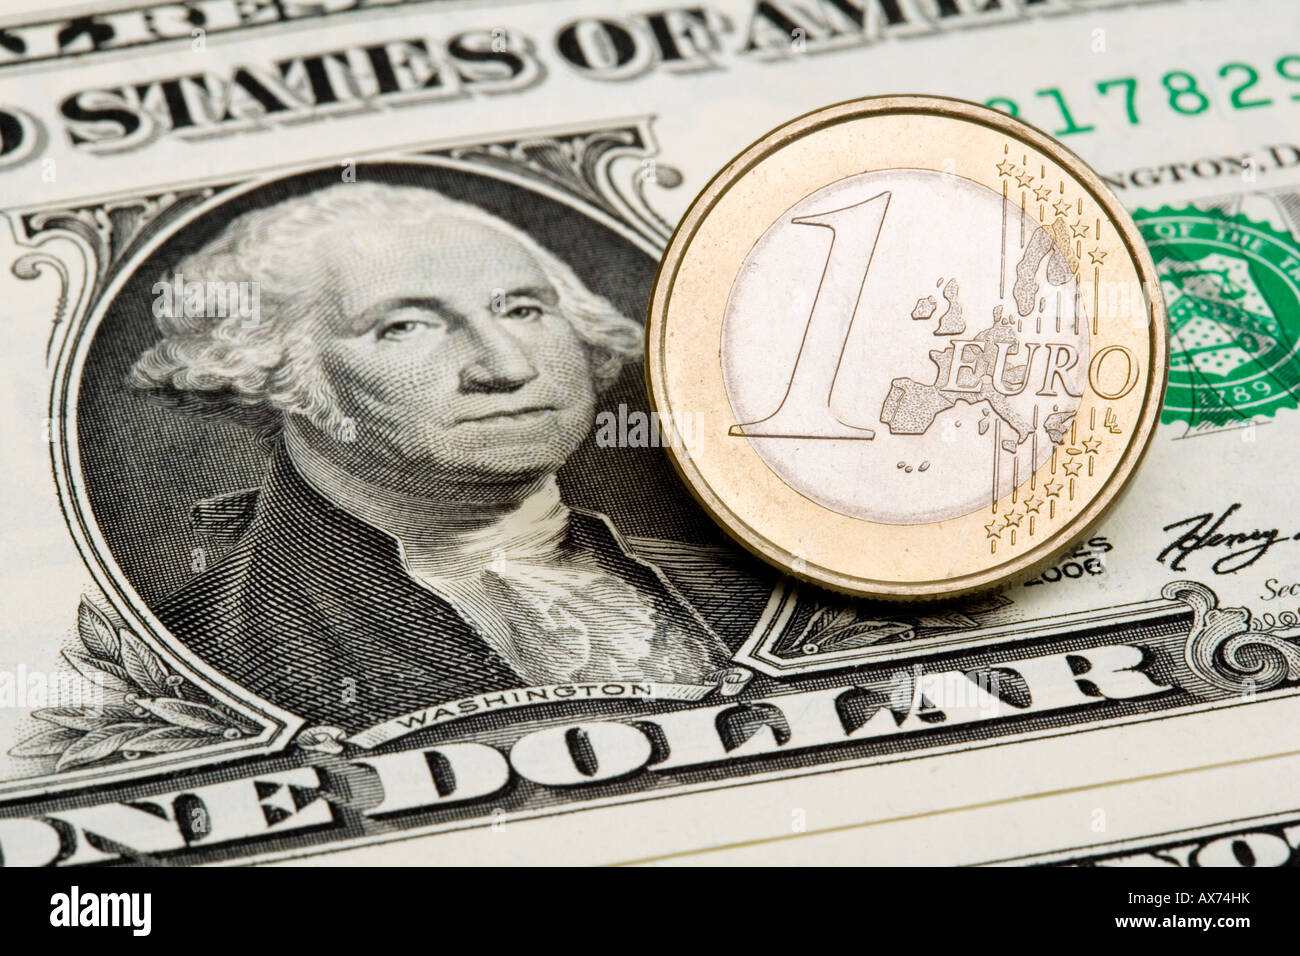 1 US Dollar banknote and 1 Euro coin Stock Photo - Alamy